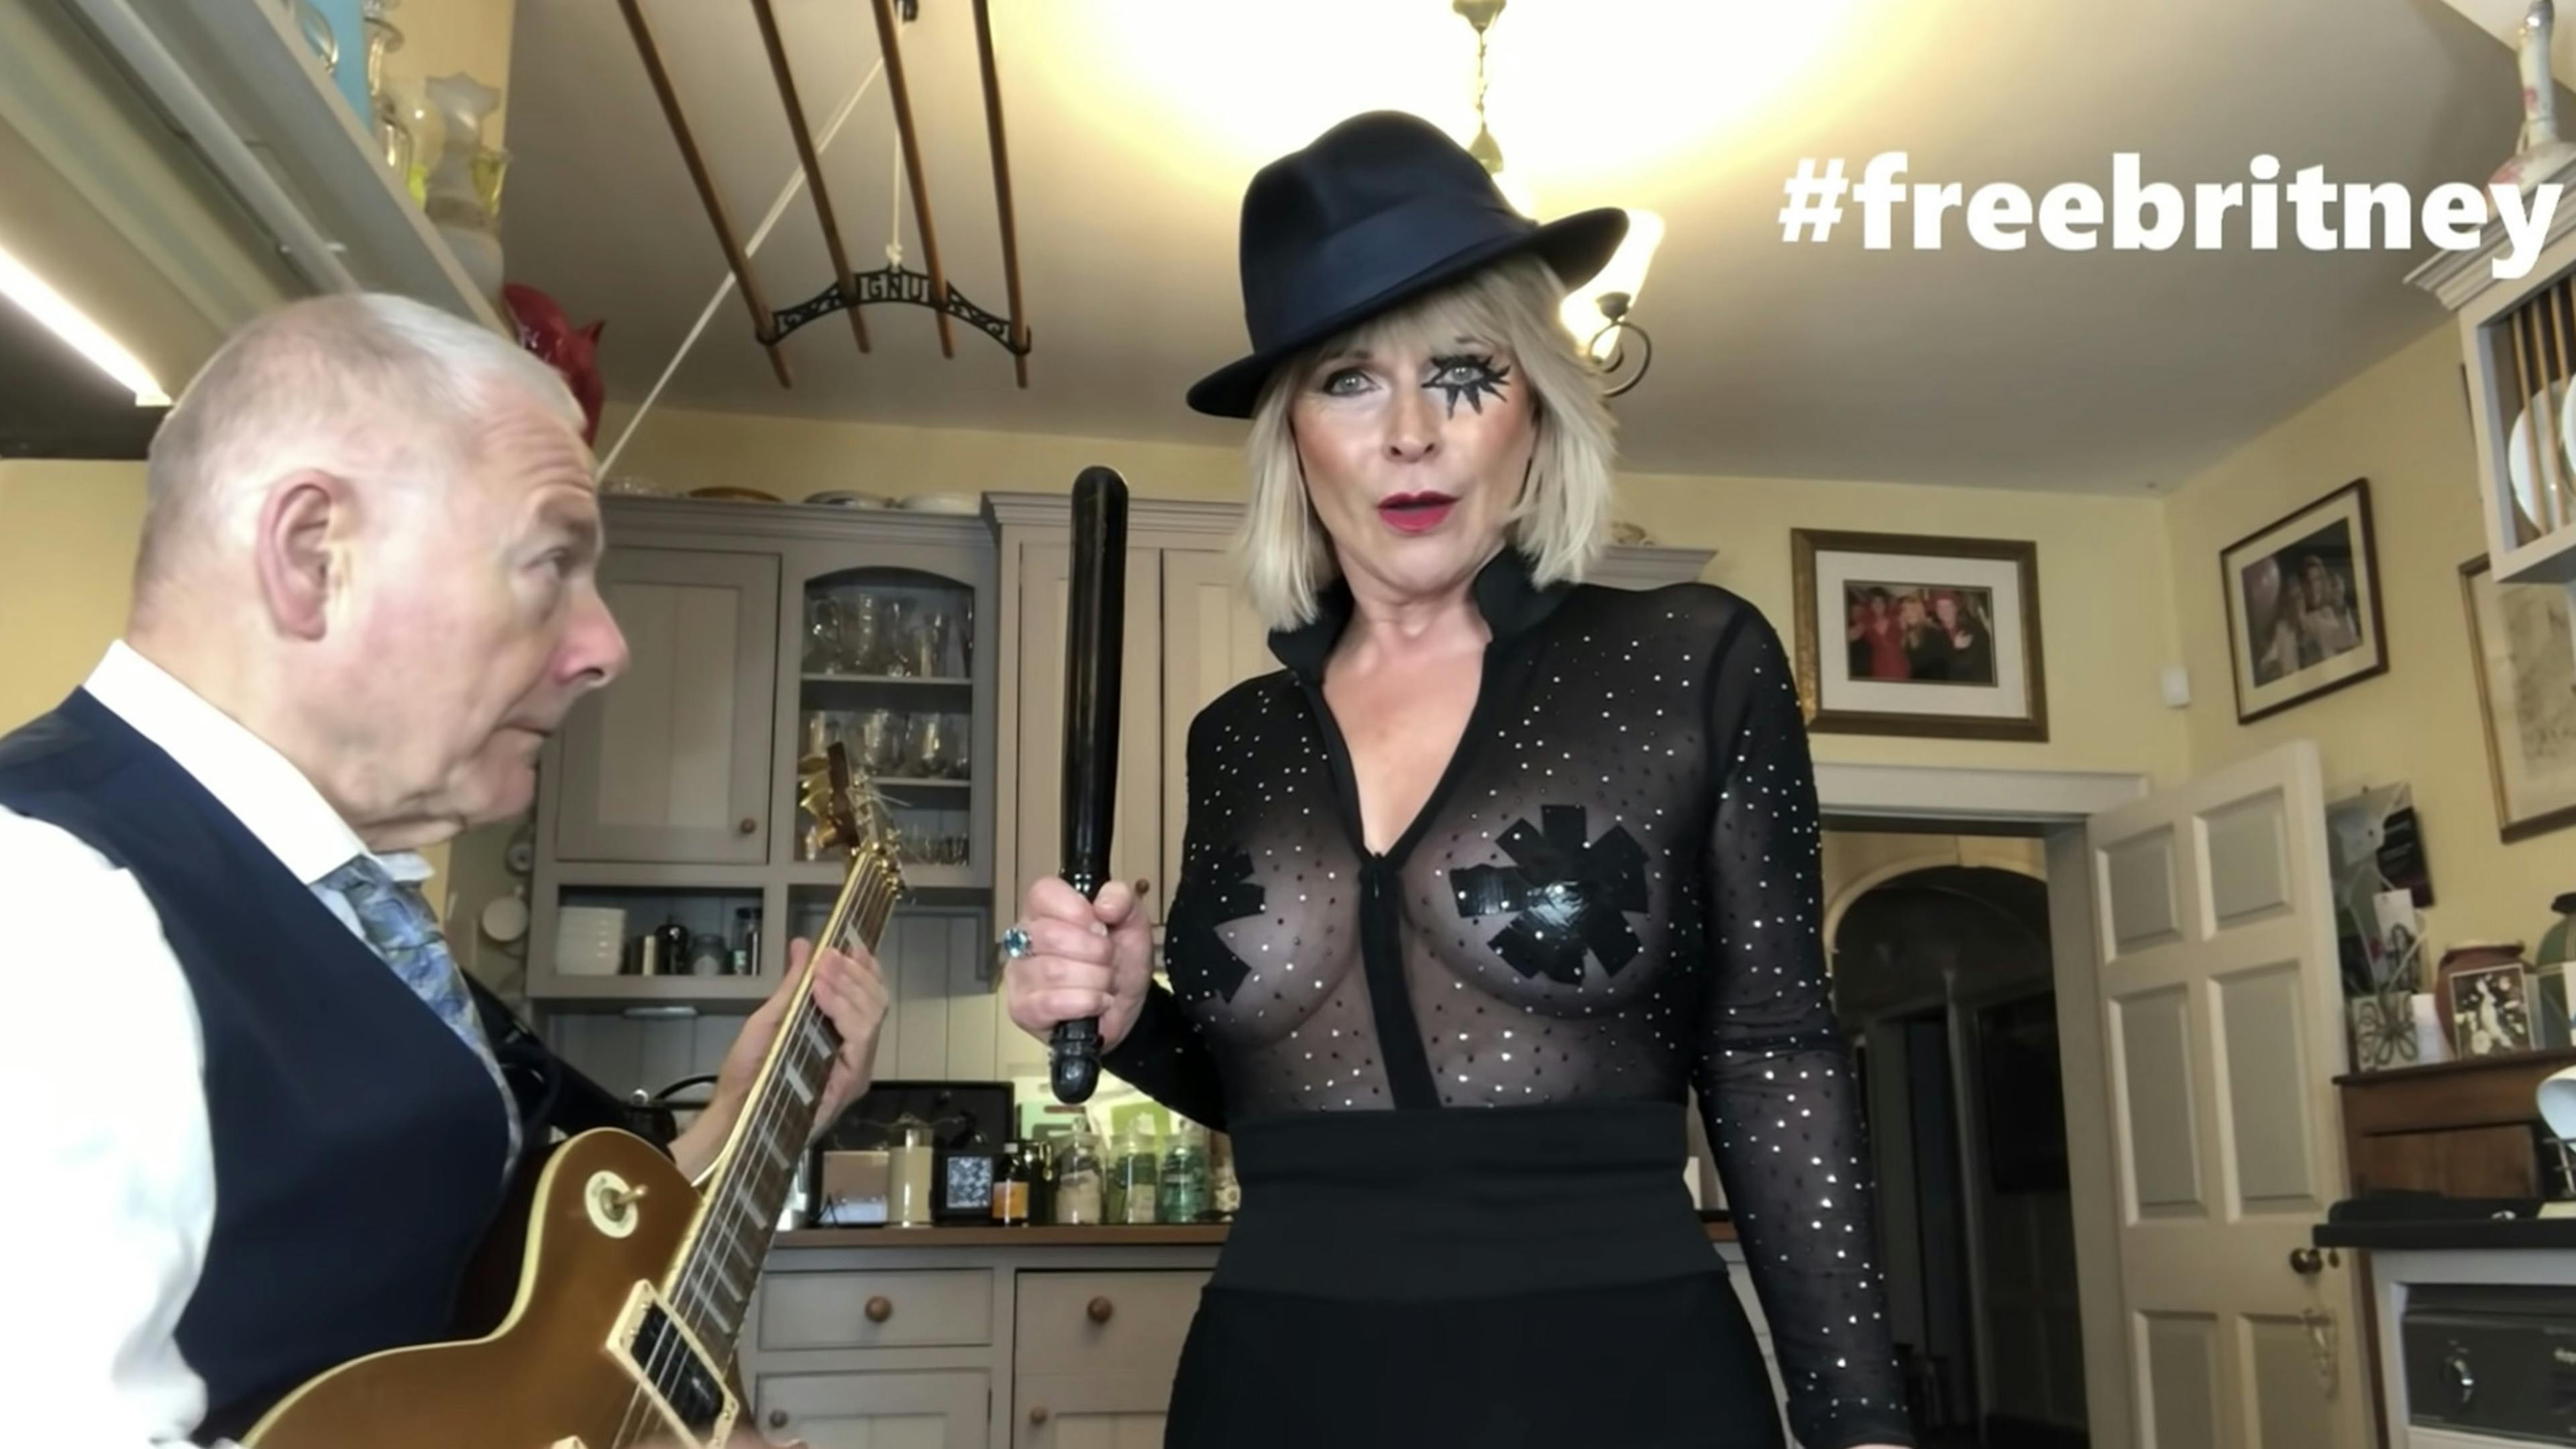 Toyah Willcox and King Crimson’s Robert Fripp cover Toxic by Britney Spears